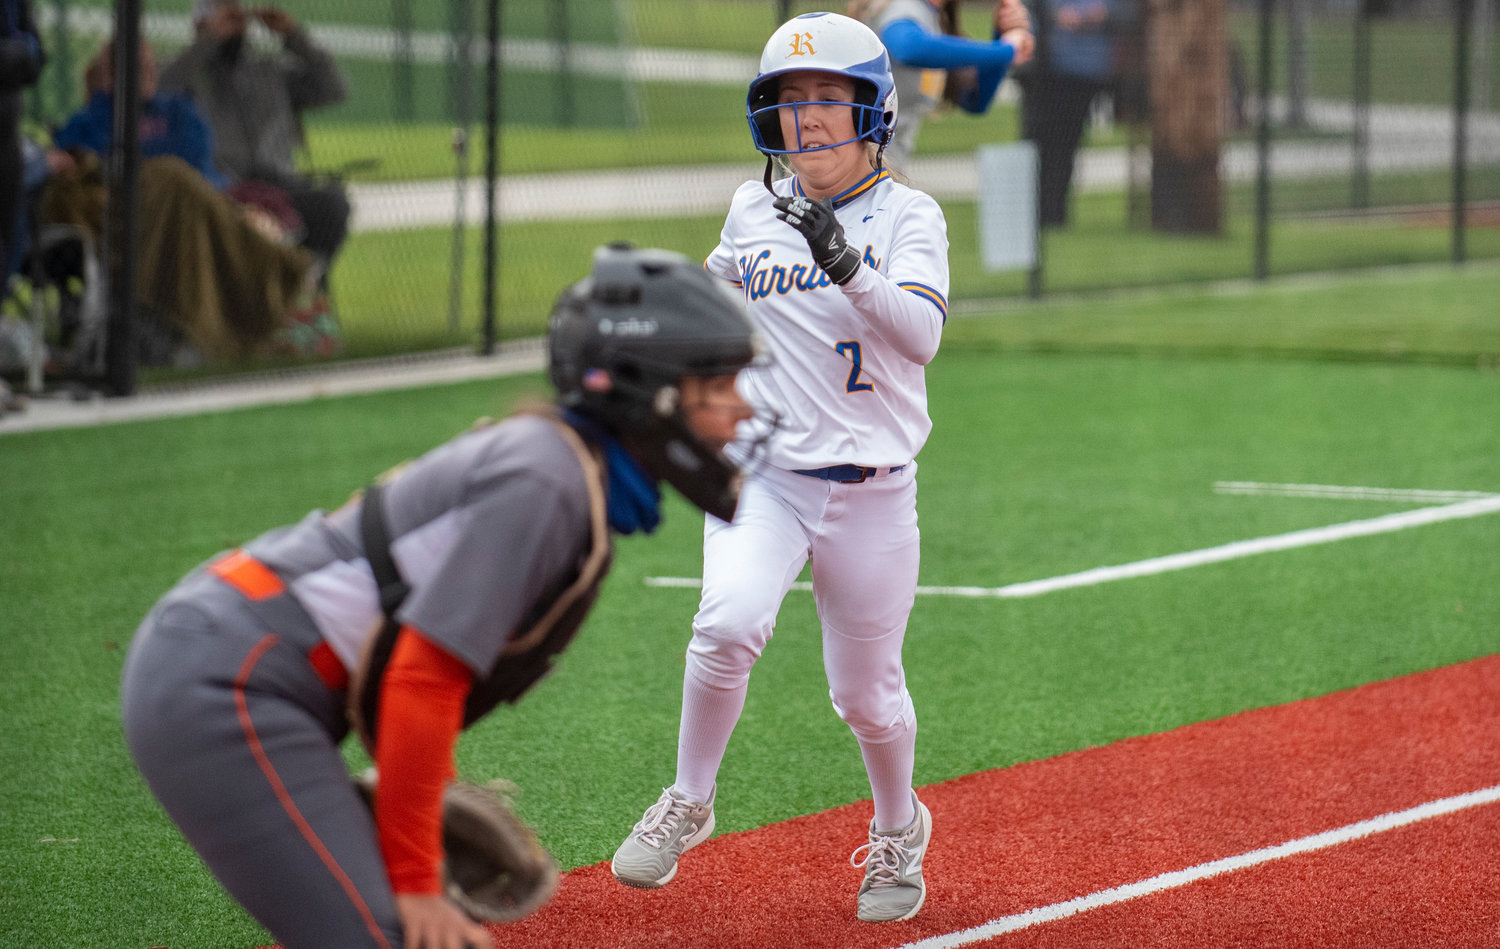 Rochester senior Faith Kennedy (2) scores a run against Ridgefield in the district semifinals on Thursday.